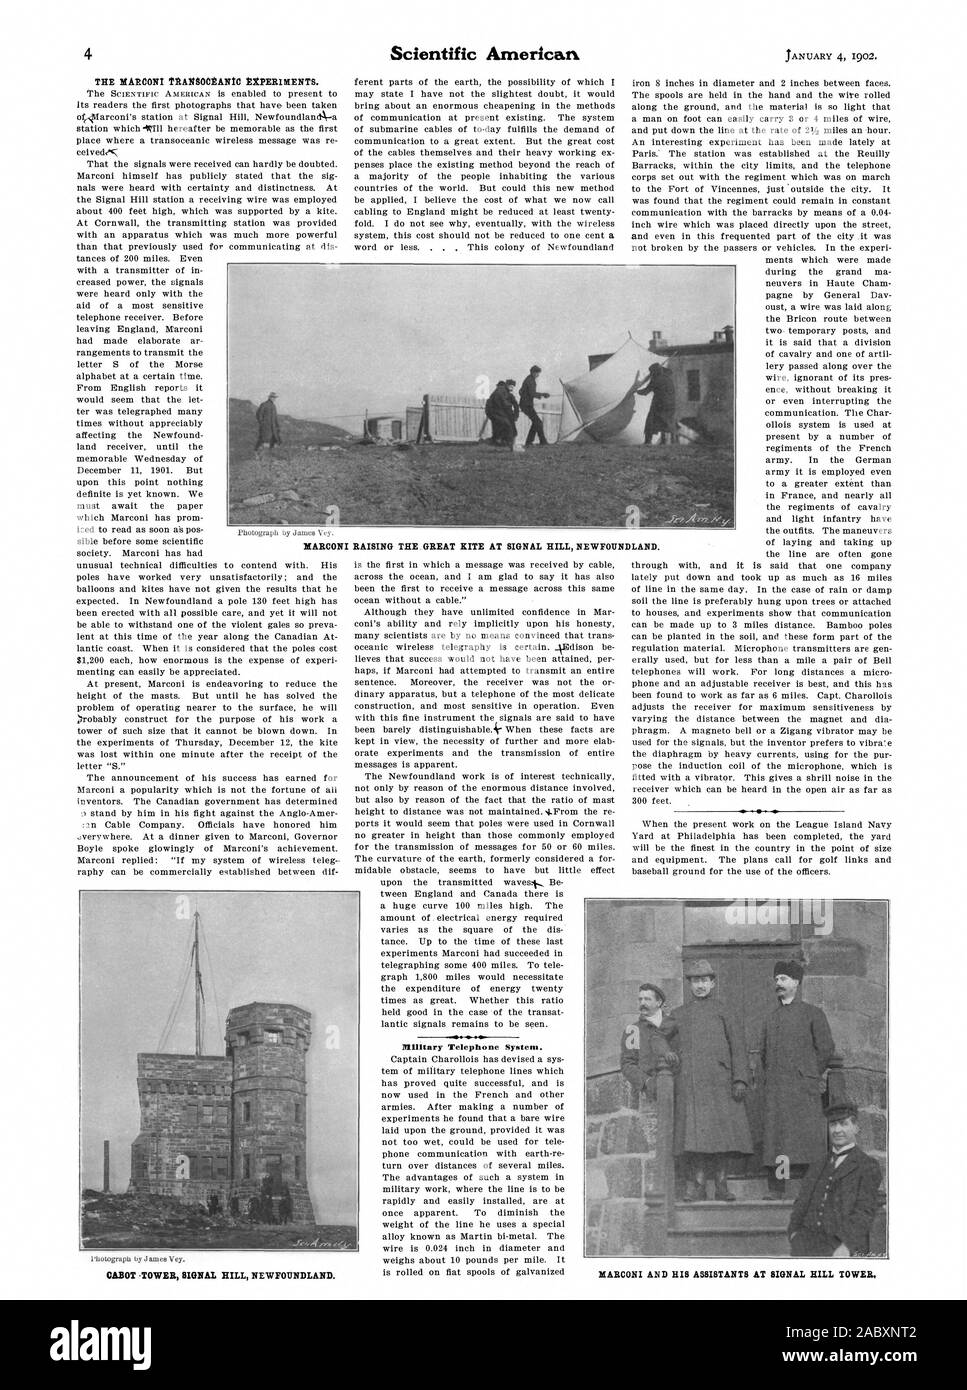 Military Telephone System. MARCONI RAISING THE GREAT RITE AT SIGNAL HILL NEWFOUNDLAND., scientific american, 1902-01-04 Stock Photo